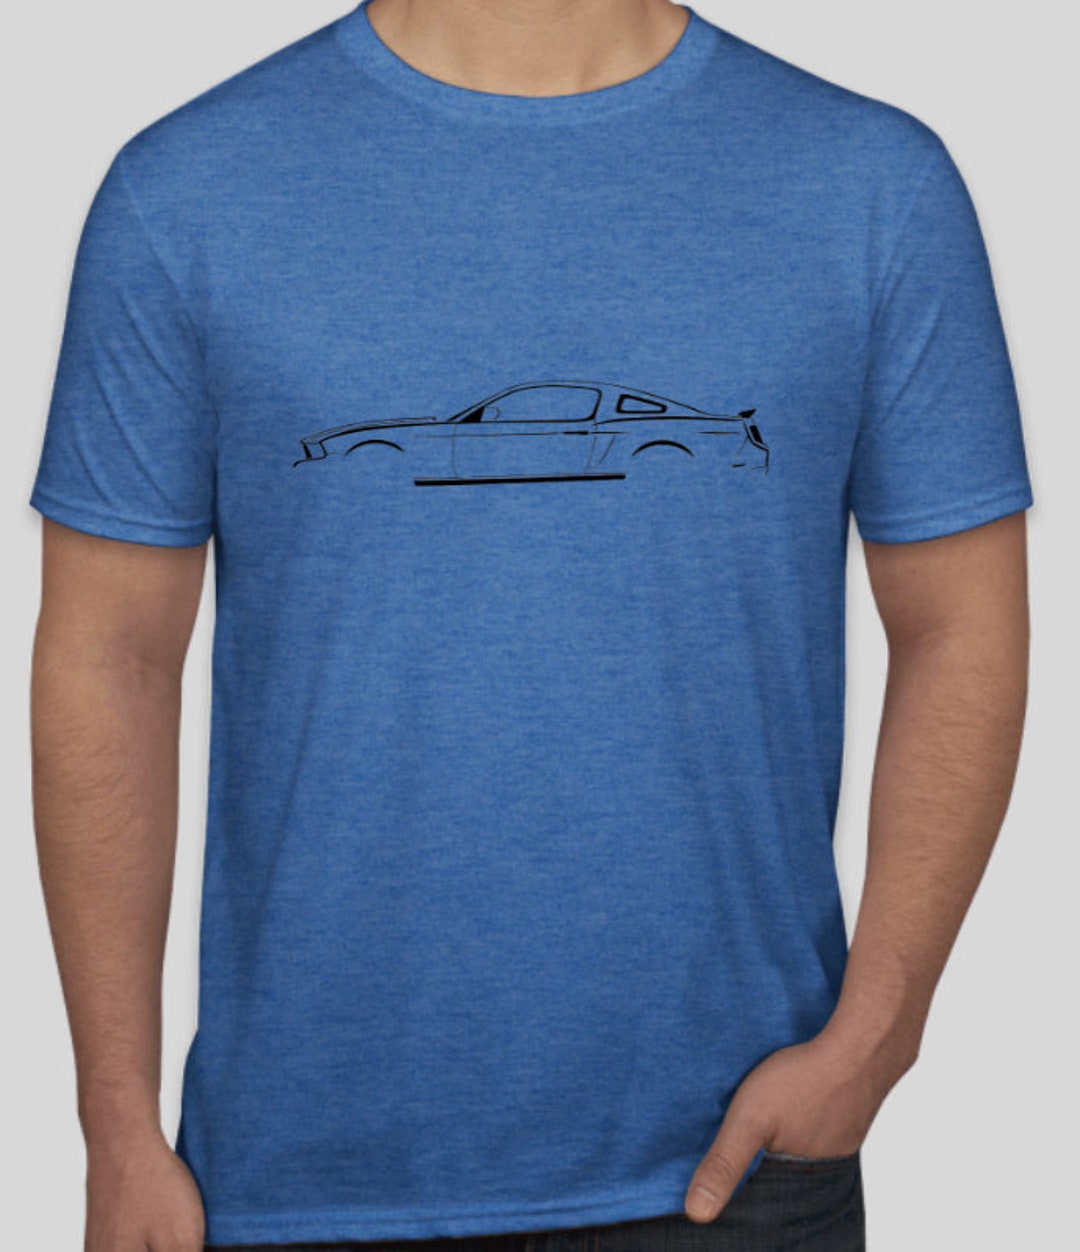 S197 Mustang - COLOR Design Silhouette Shirt Etsy CHOOSE Your Black T